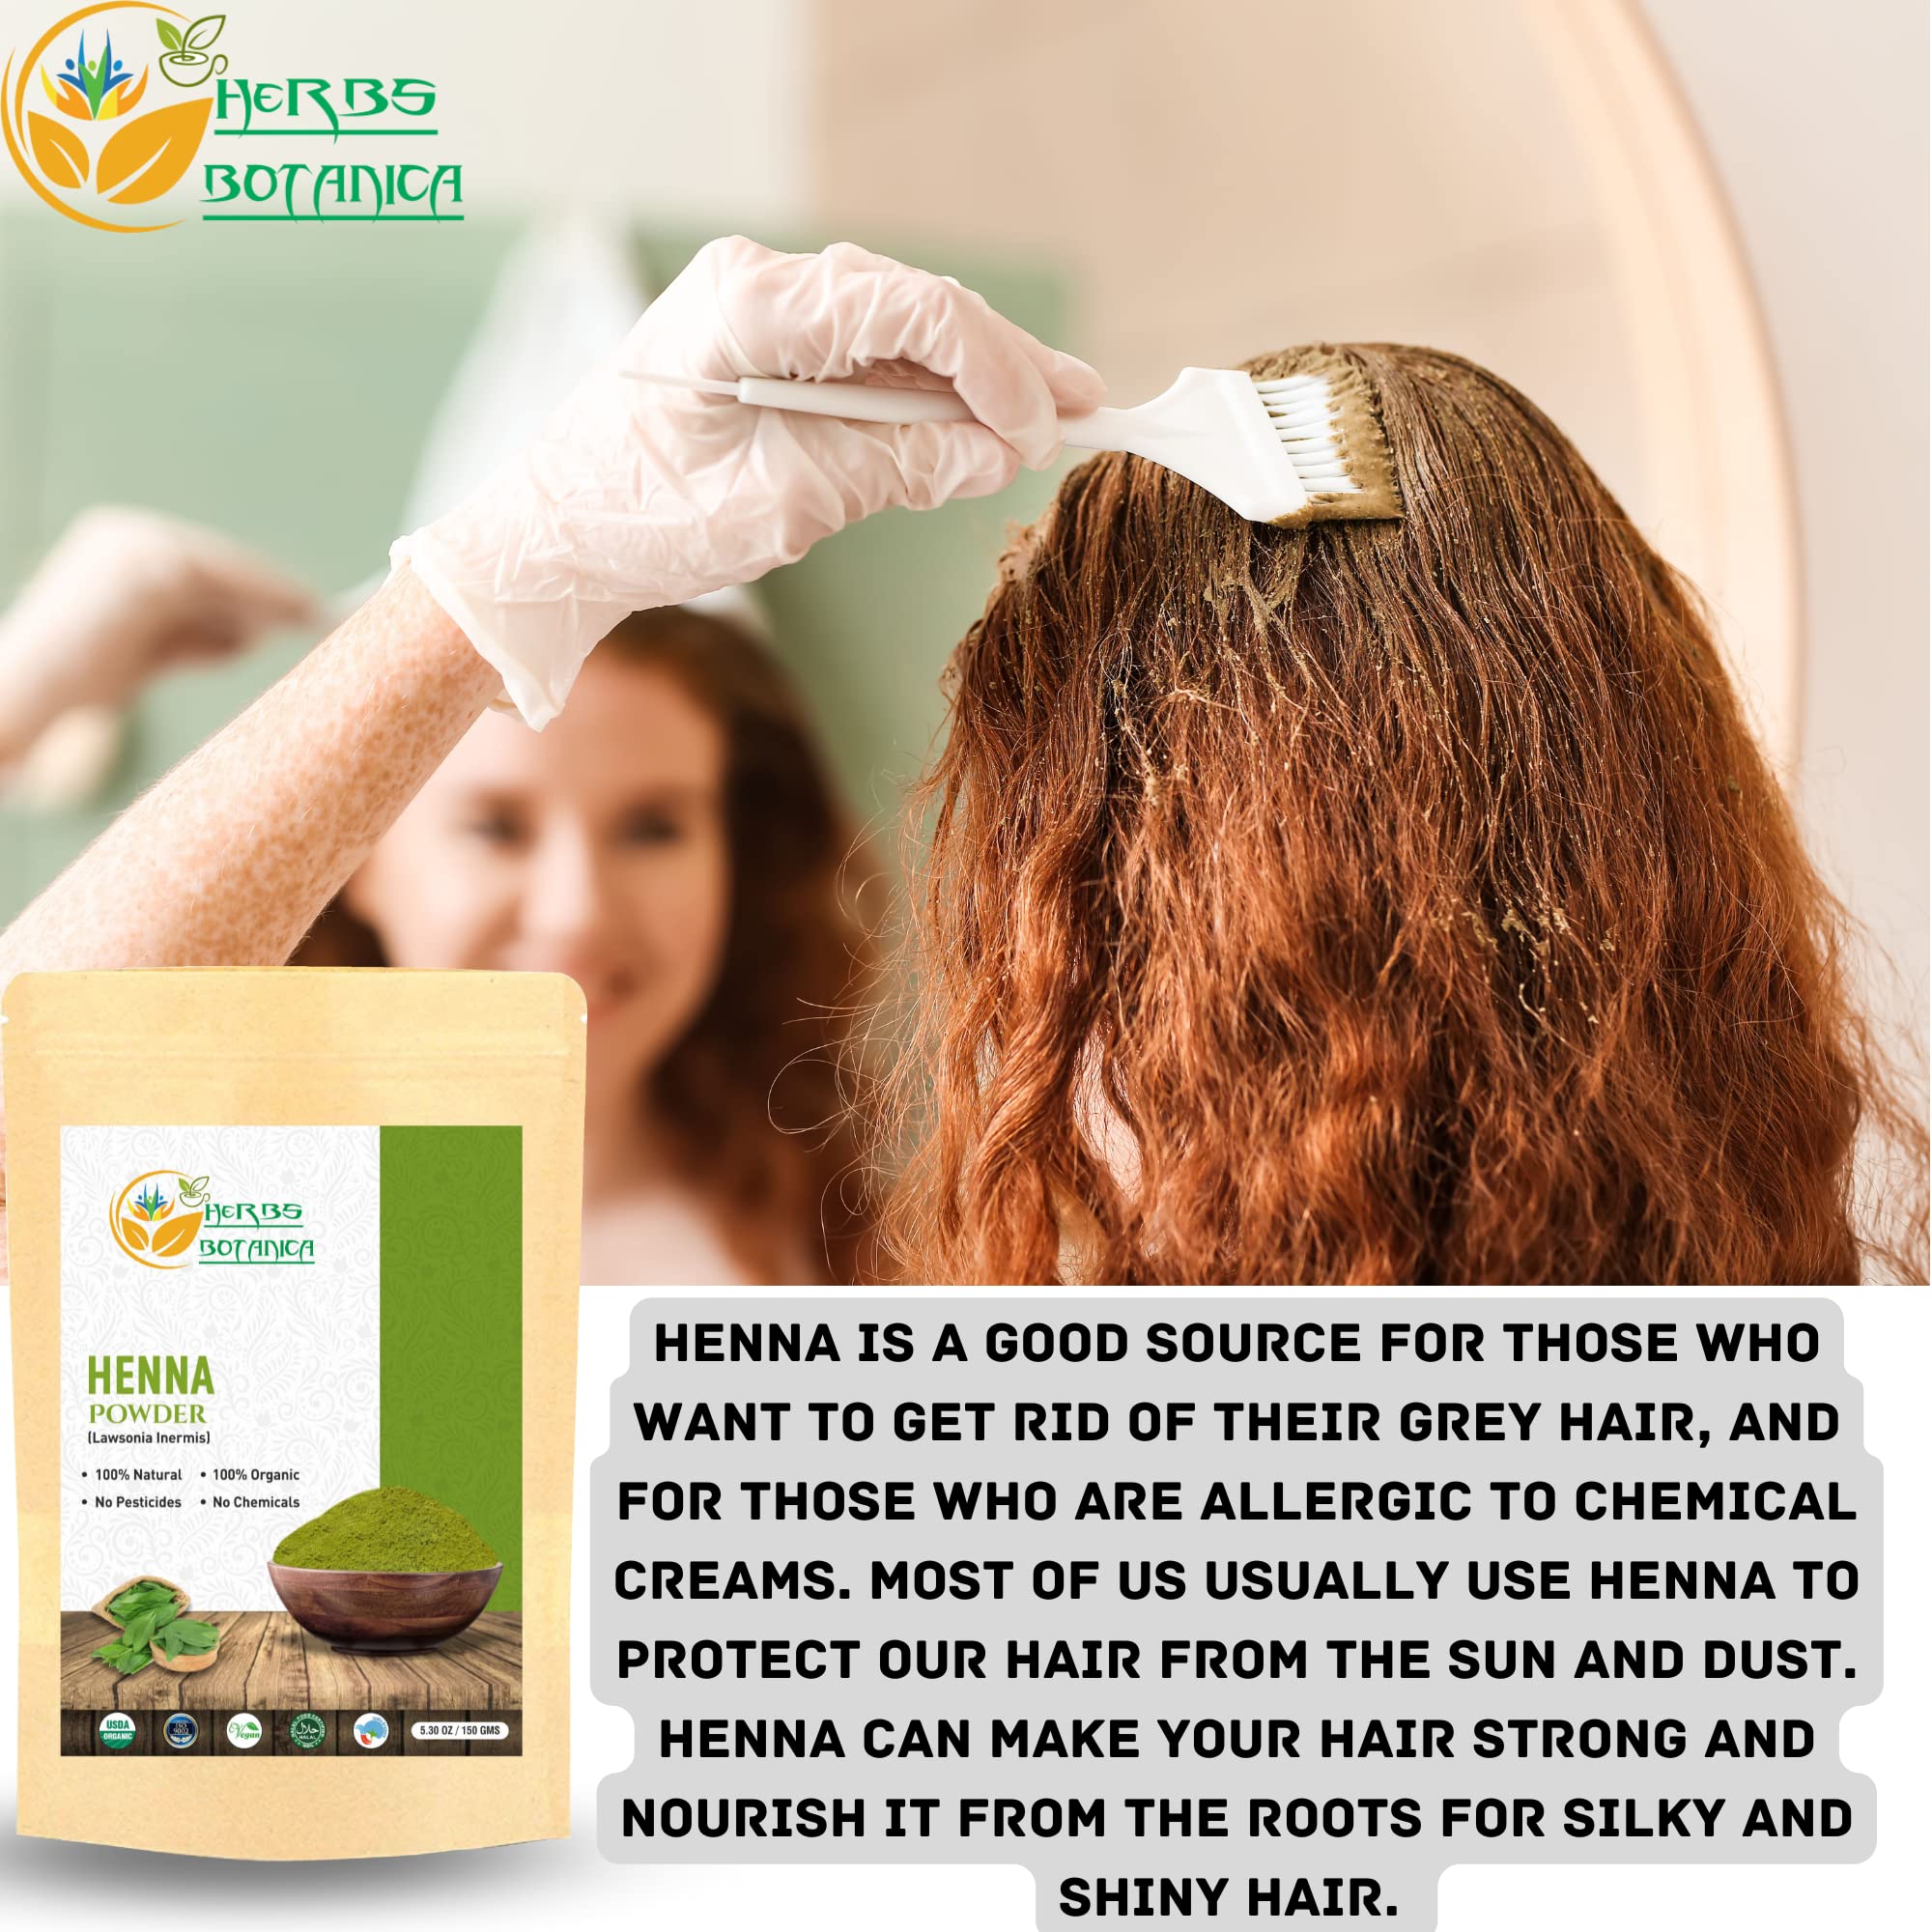 Herbs Botanica Organic Henna Powder For Hair Color 100% Pure Give Natural Color, Shine and Conditioning to Hair Triple Sifted Henna For Hair Dye Grown and Cultivated in Rajasthan 100 % Chemical Free 150 Gms / 5.3 Oz Pack